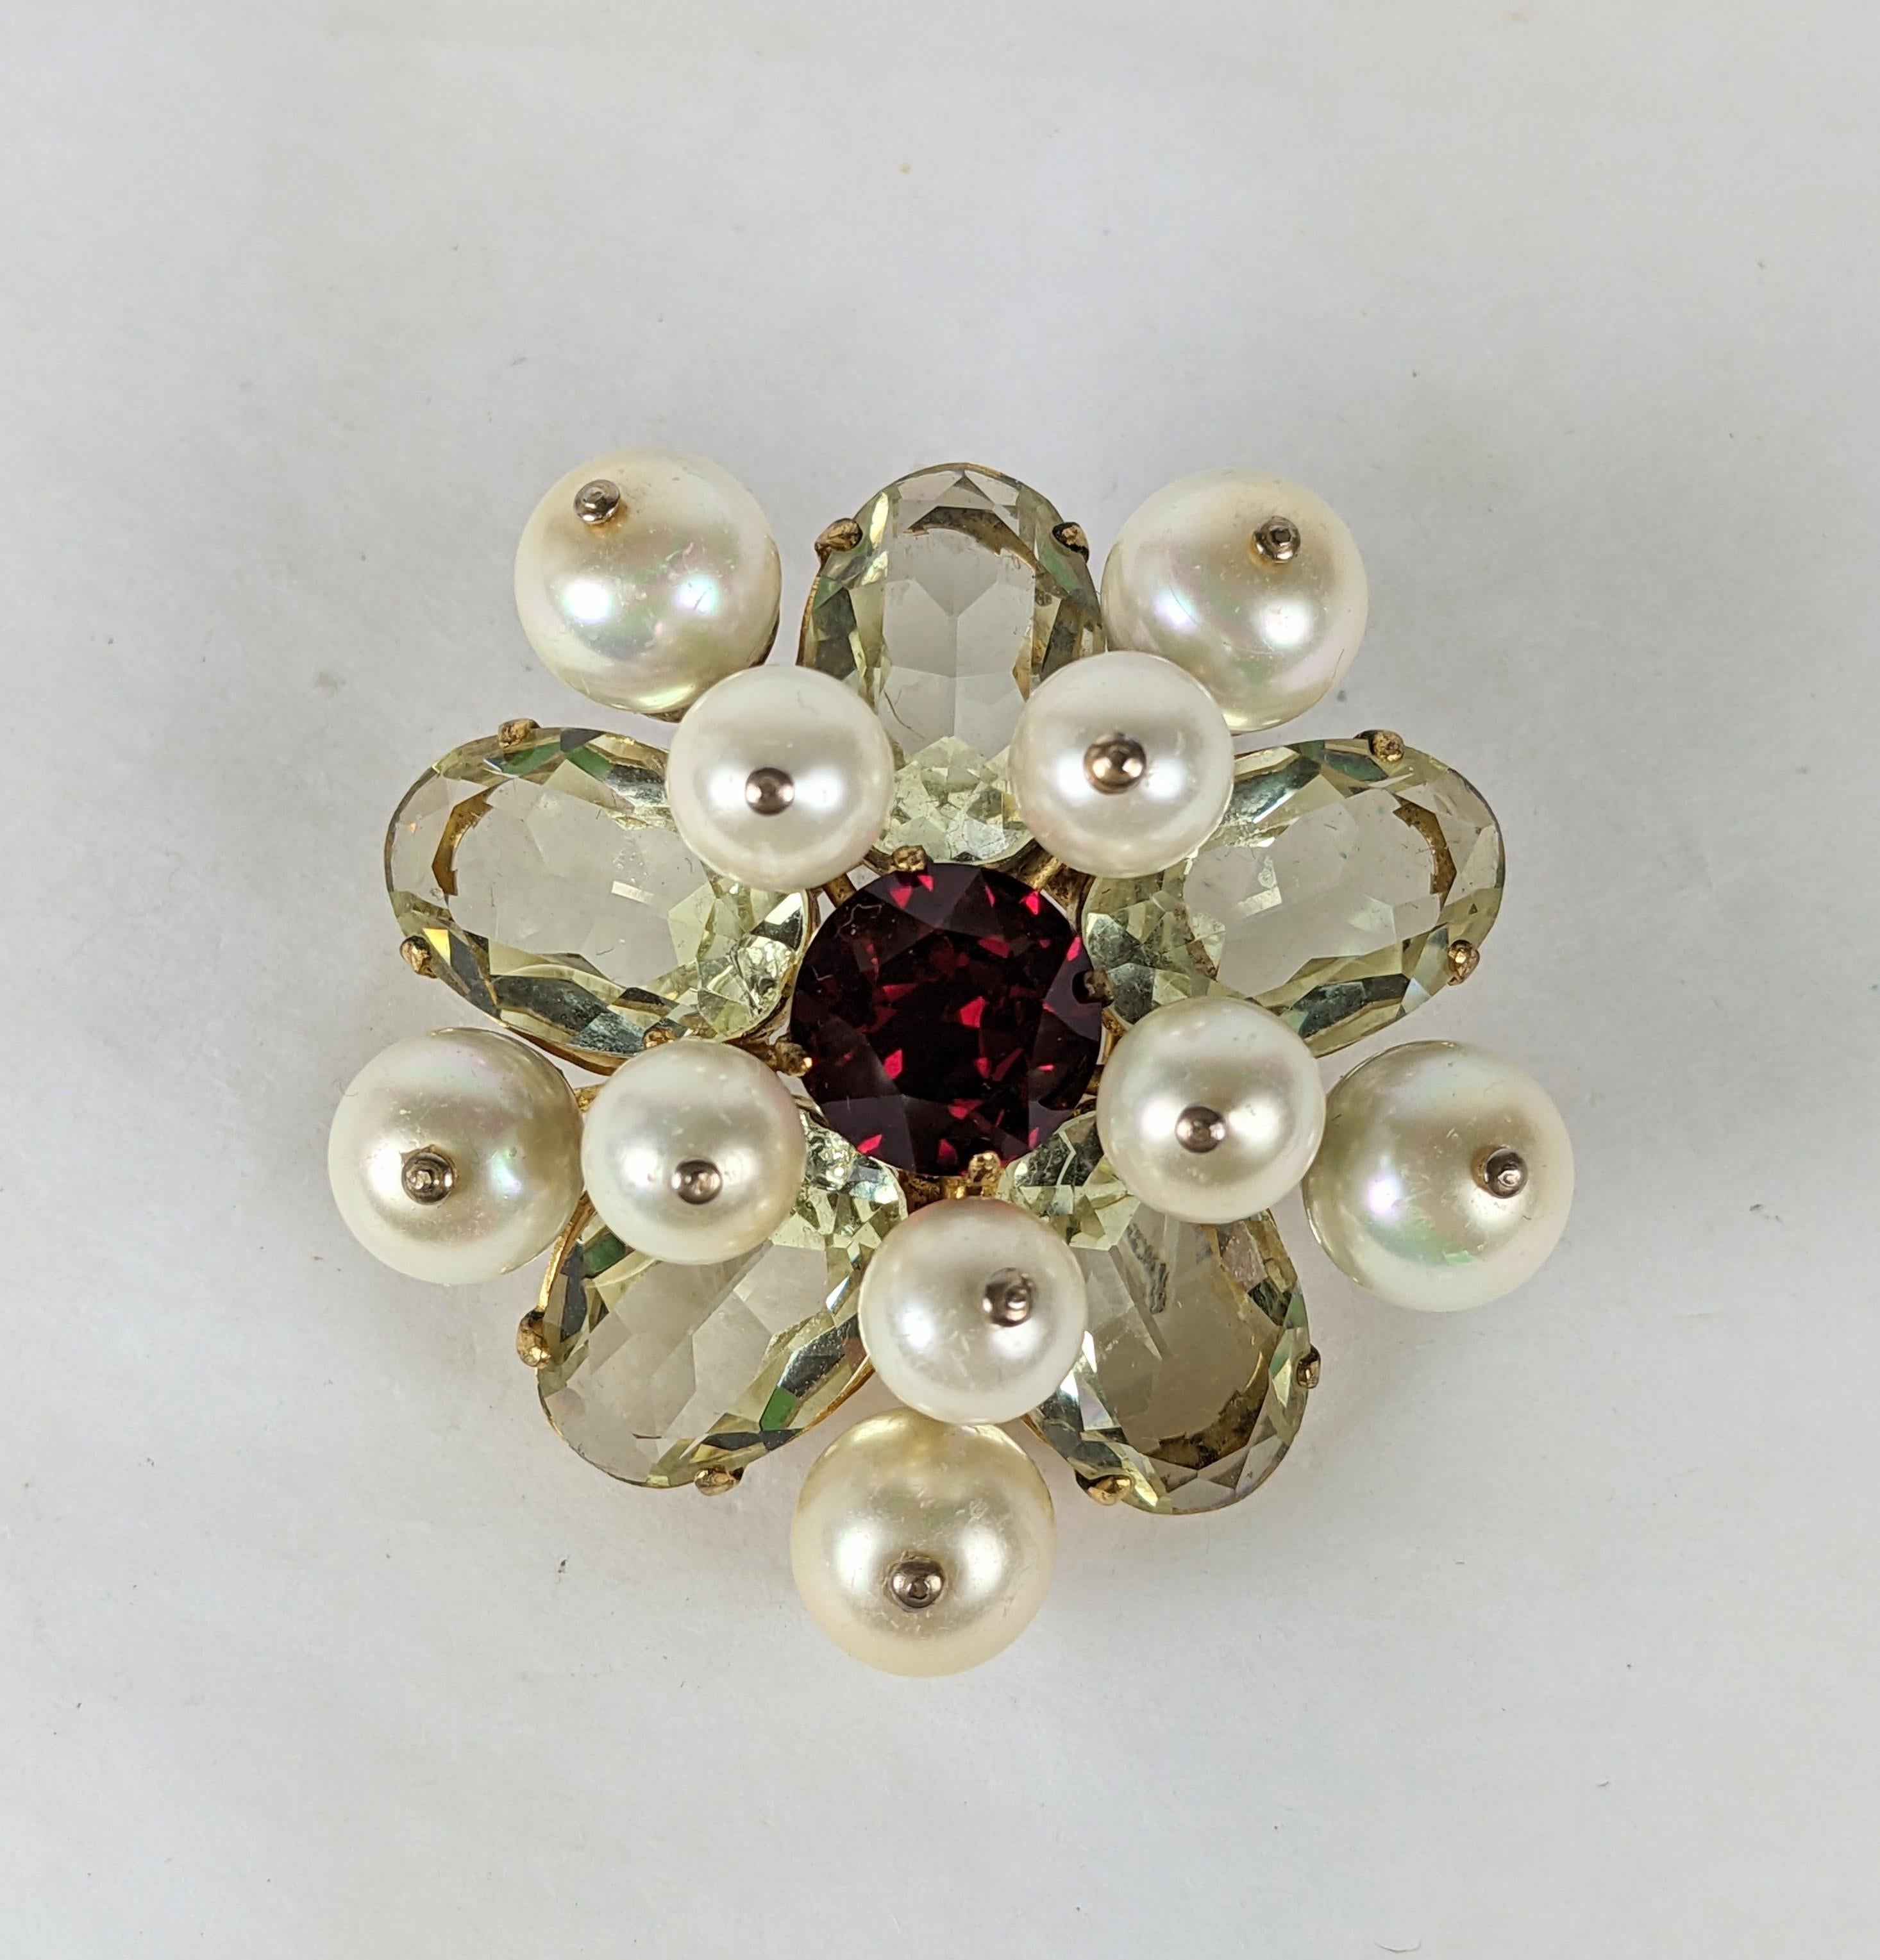 Roger Jean Pierre, for Christian Dior,  Gripoix  pegged glass pearl, lemon citrine quartz and faux ruby crest  brooch, set in gilt plated metal. This brooch is unsigned, although the structure of its metal work is consistent with that of other